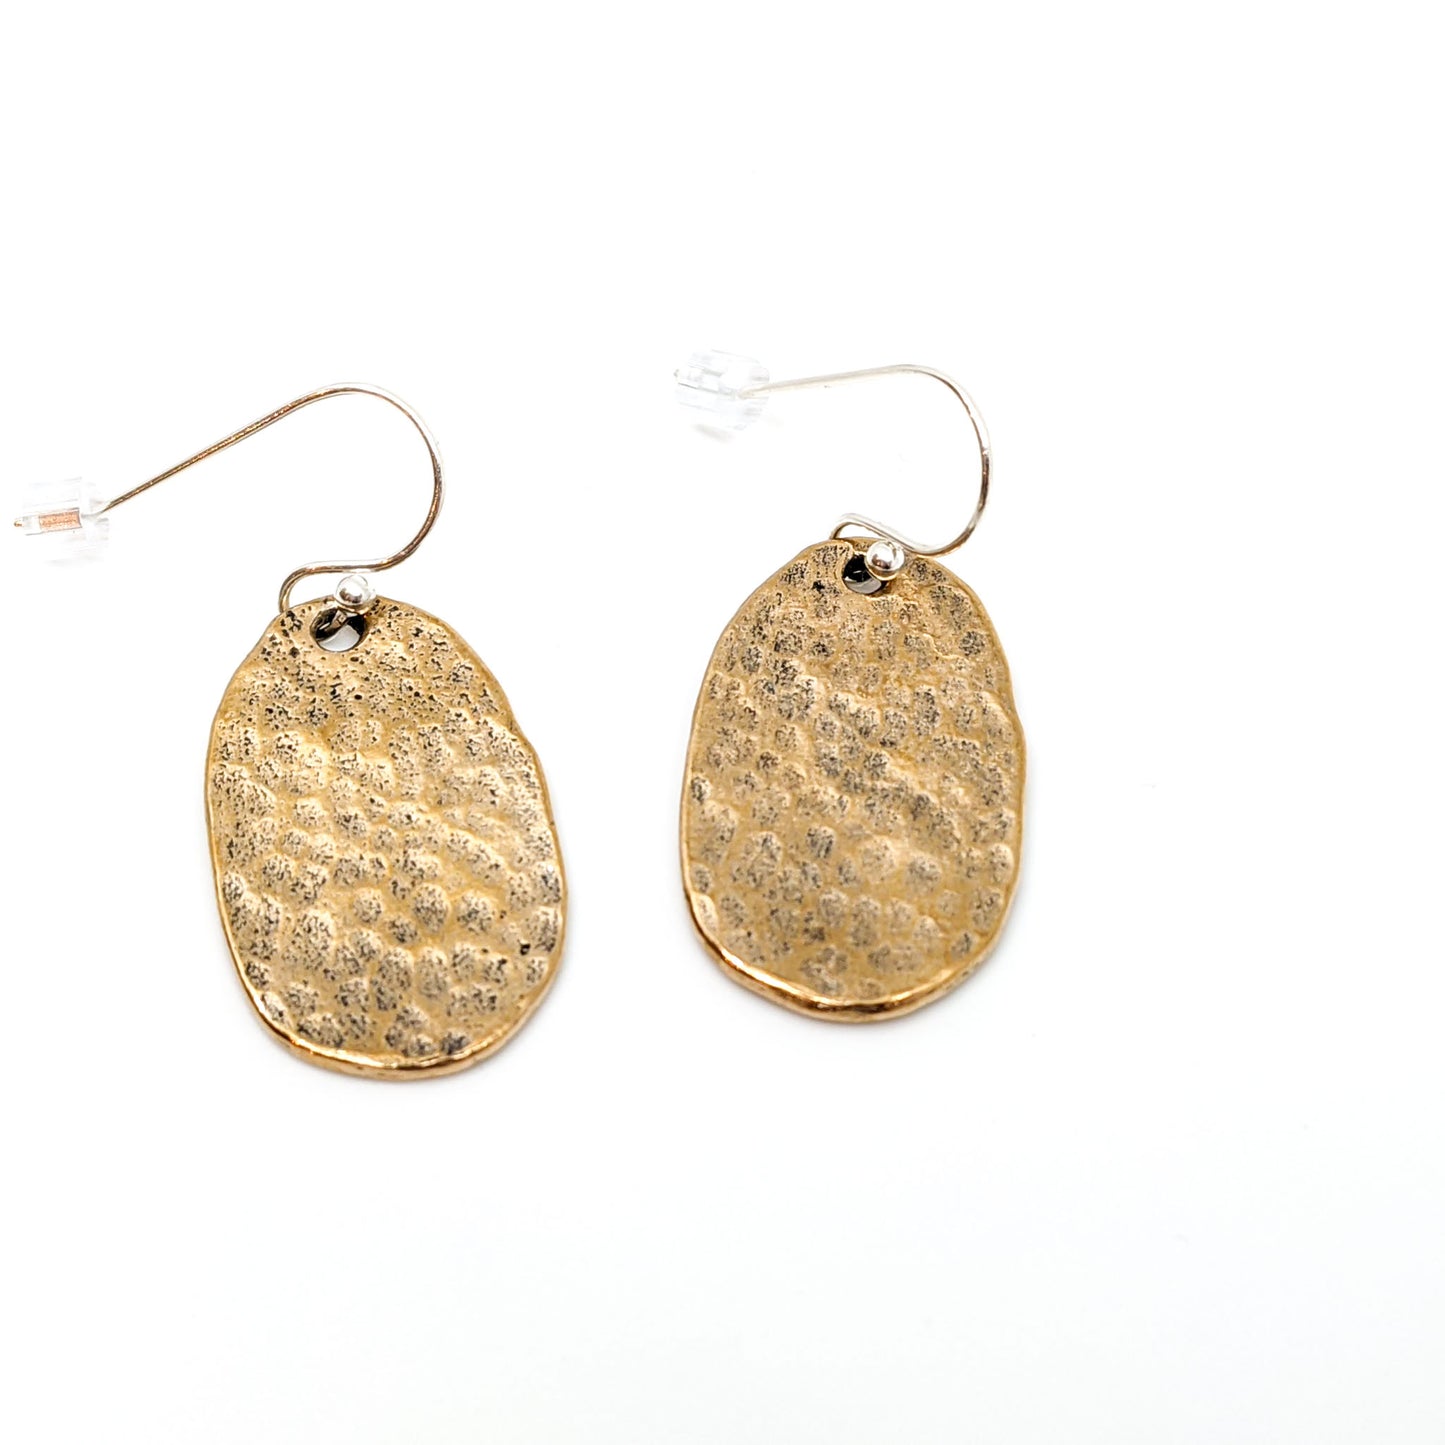 Hammered Oval Earrings- Medium Ancient Bronze